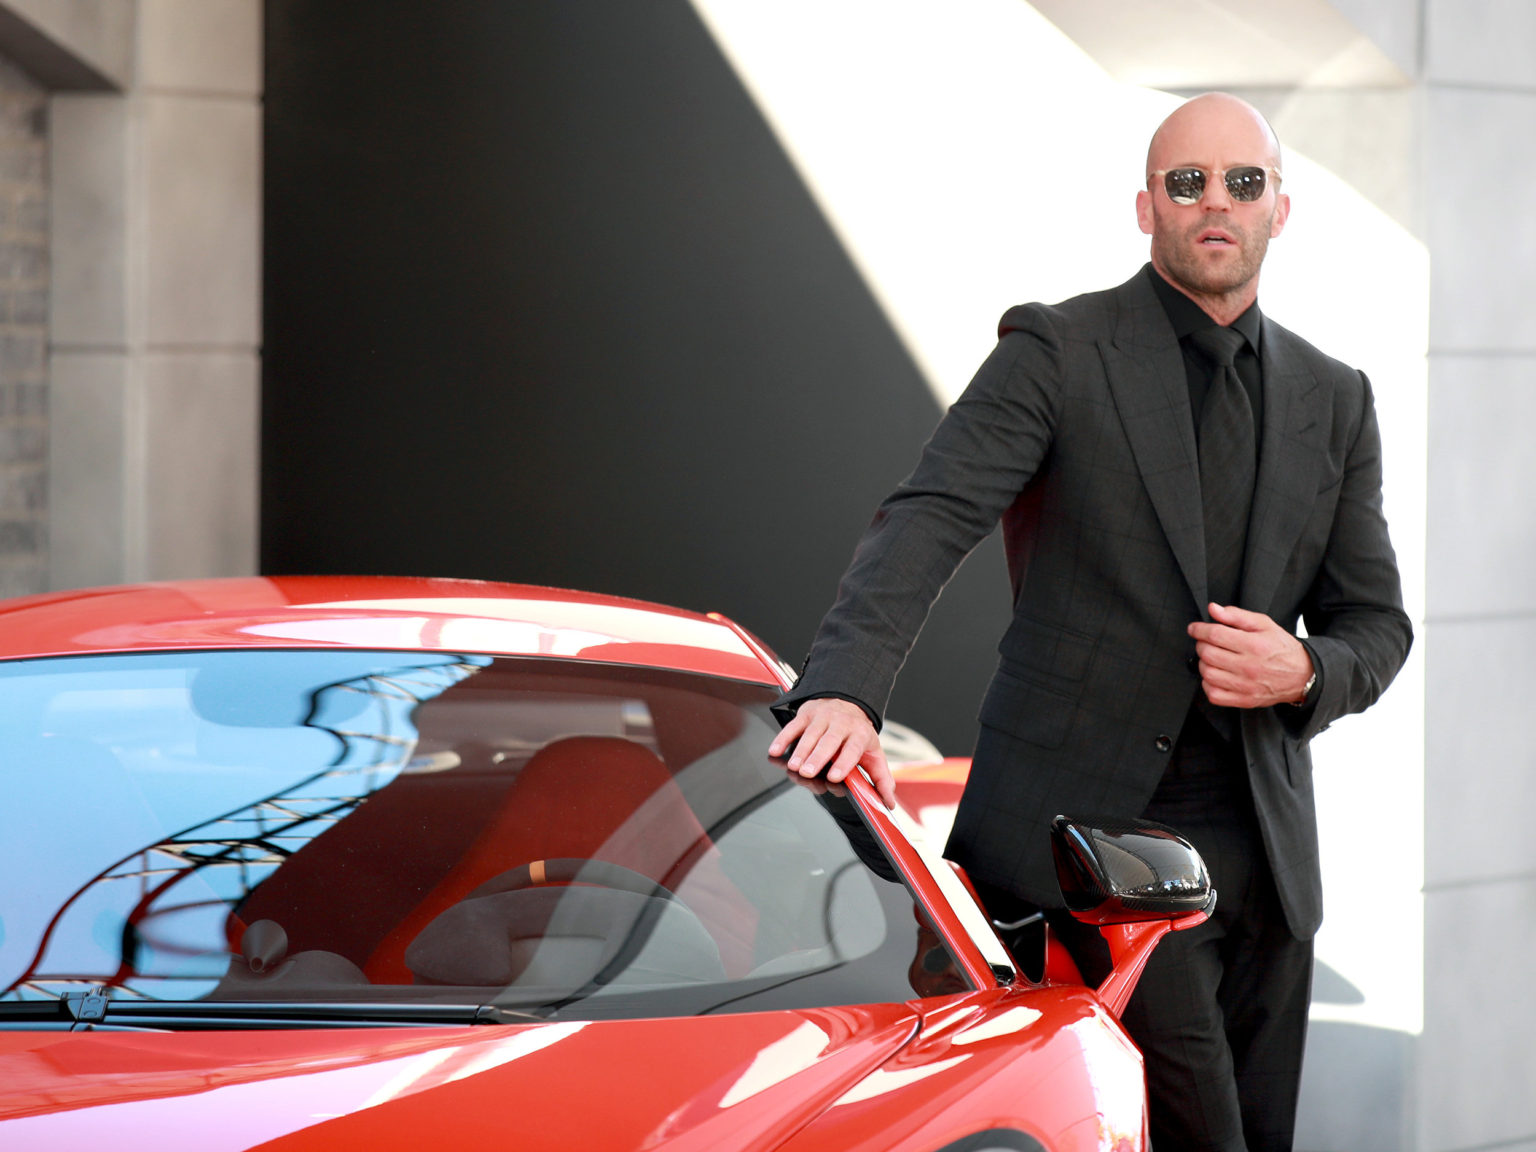 Actor Jason Statham has starred in some of the most car-centric films of all time.